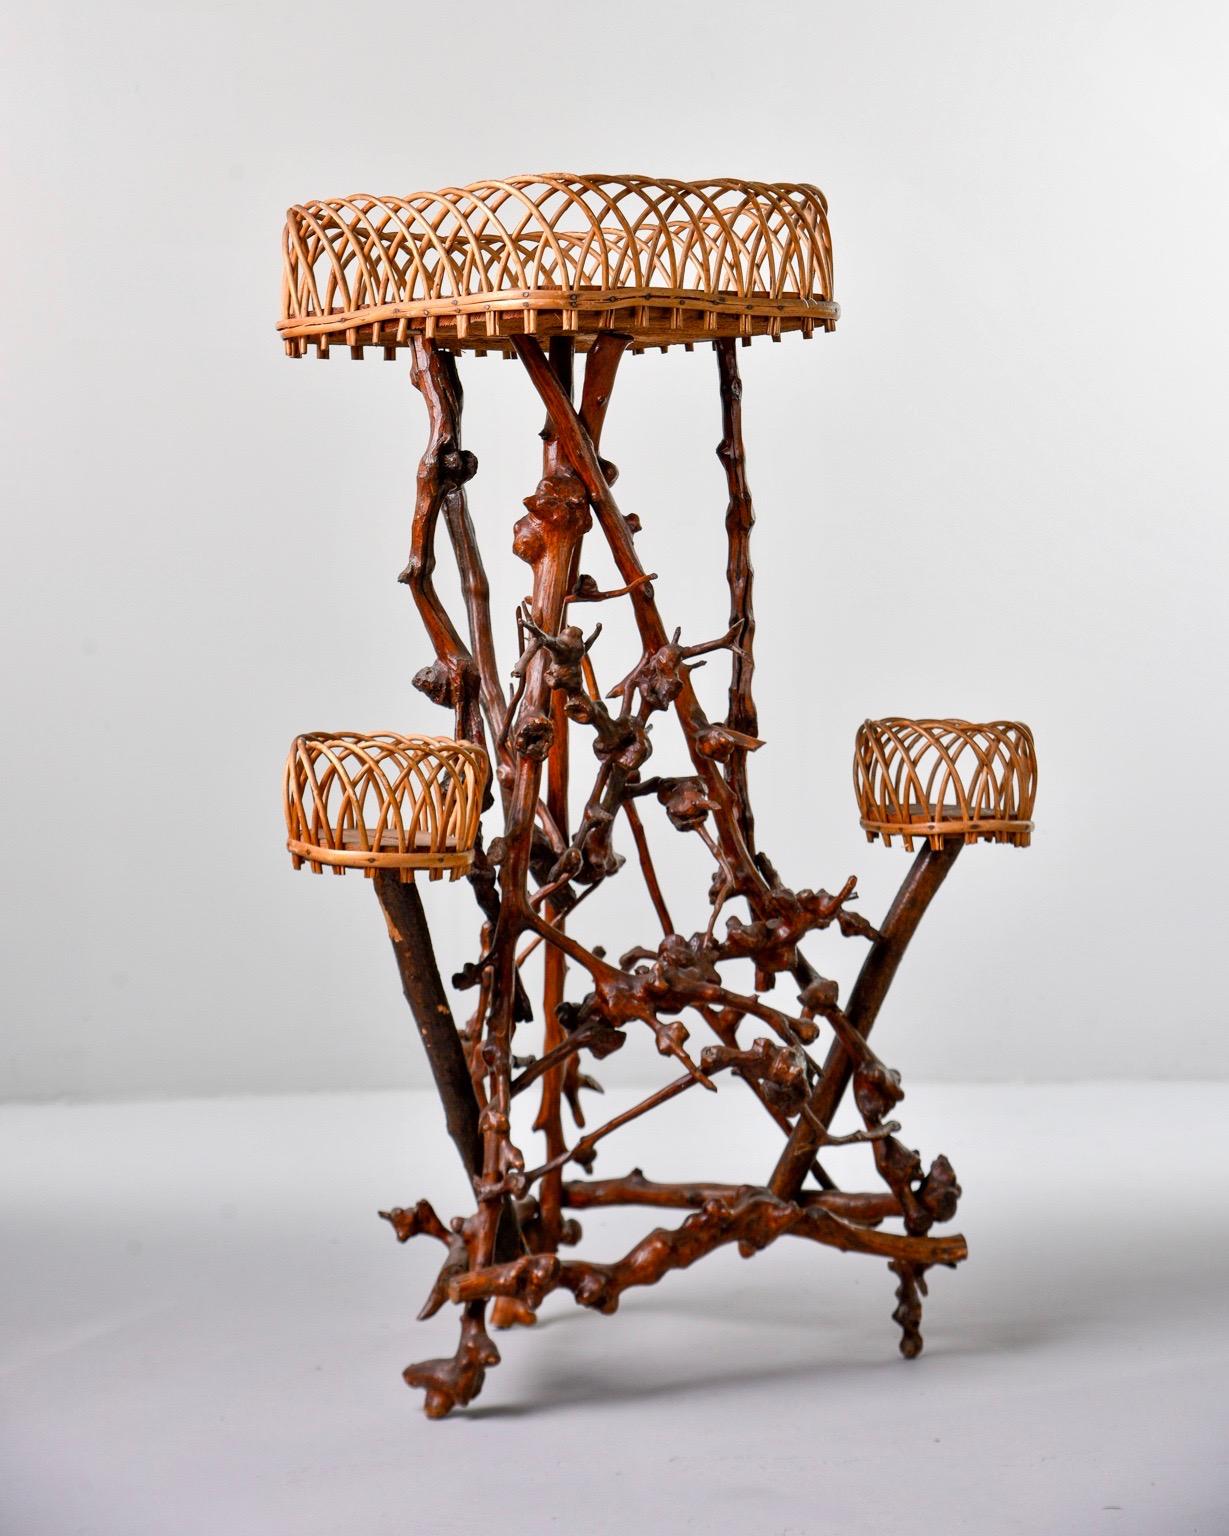 Unusual natural form plant stand from France is made of knobby twigs and features a large top shelf with a scalloped rattan gallery and two small lower platforms to hold potted plants, circa 1890s.